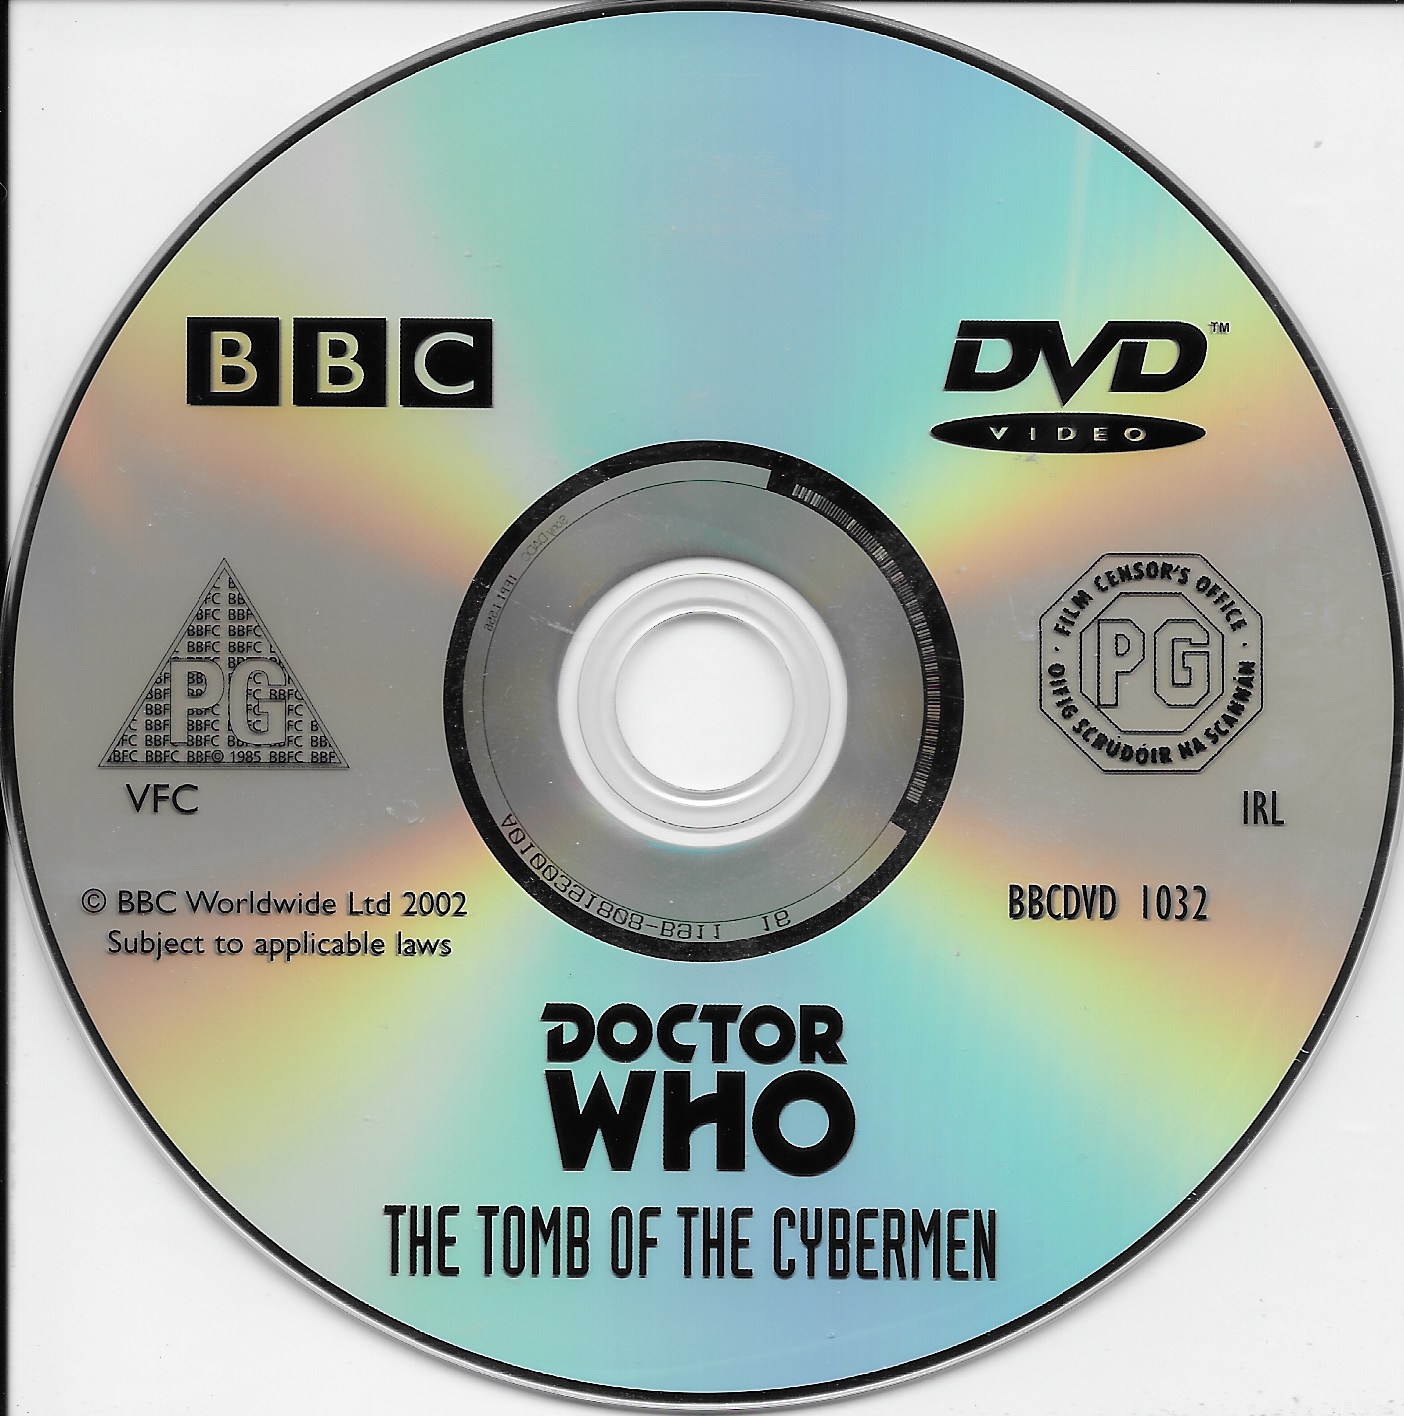 View DVD's label picture A.